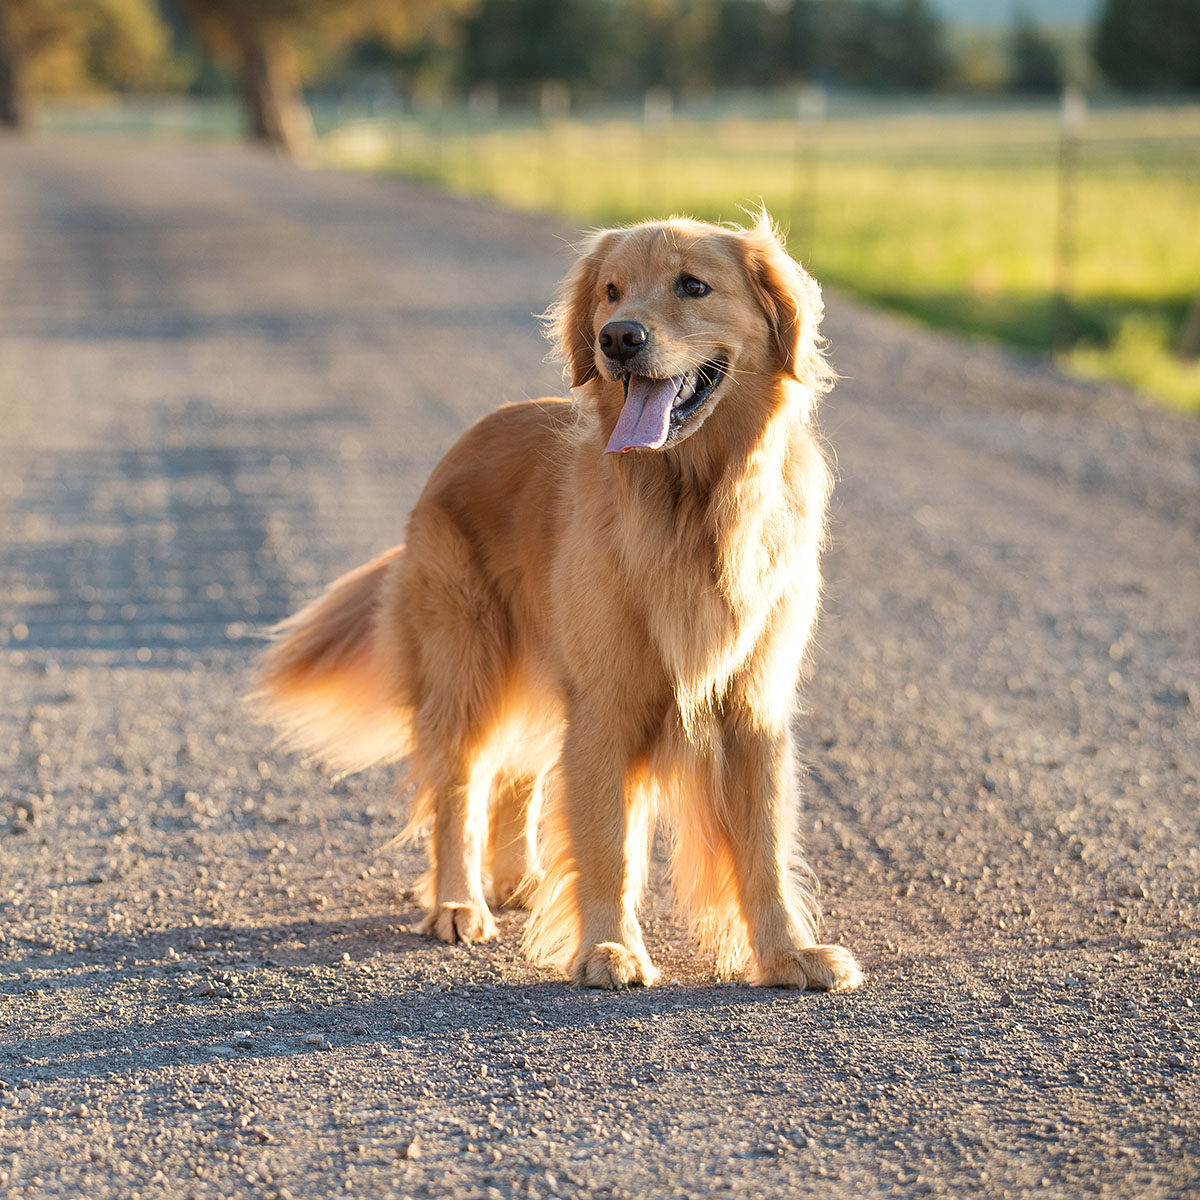 dog standing on dirt road